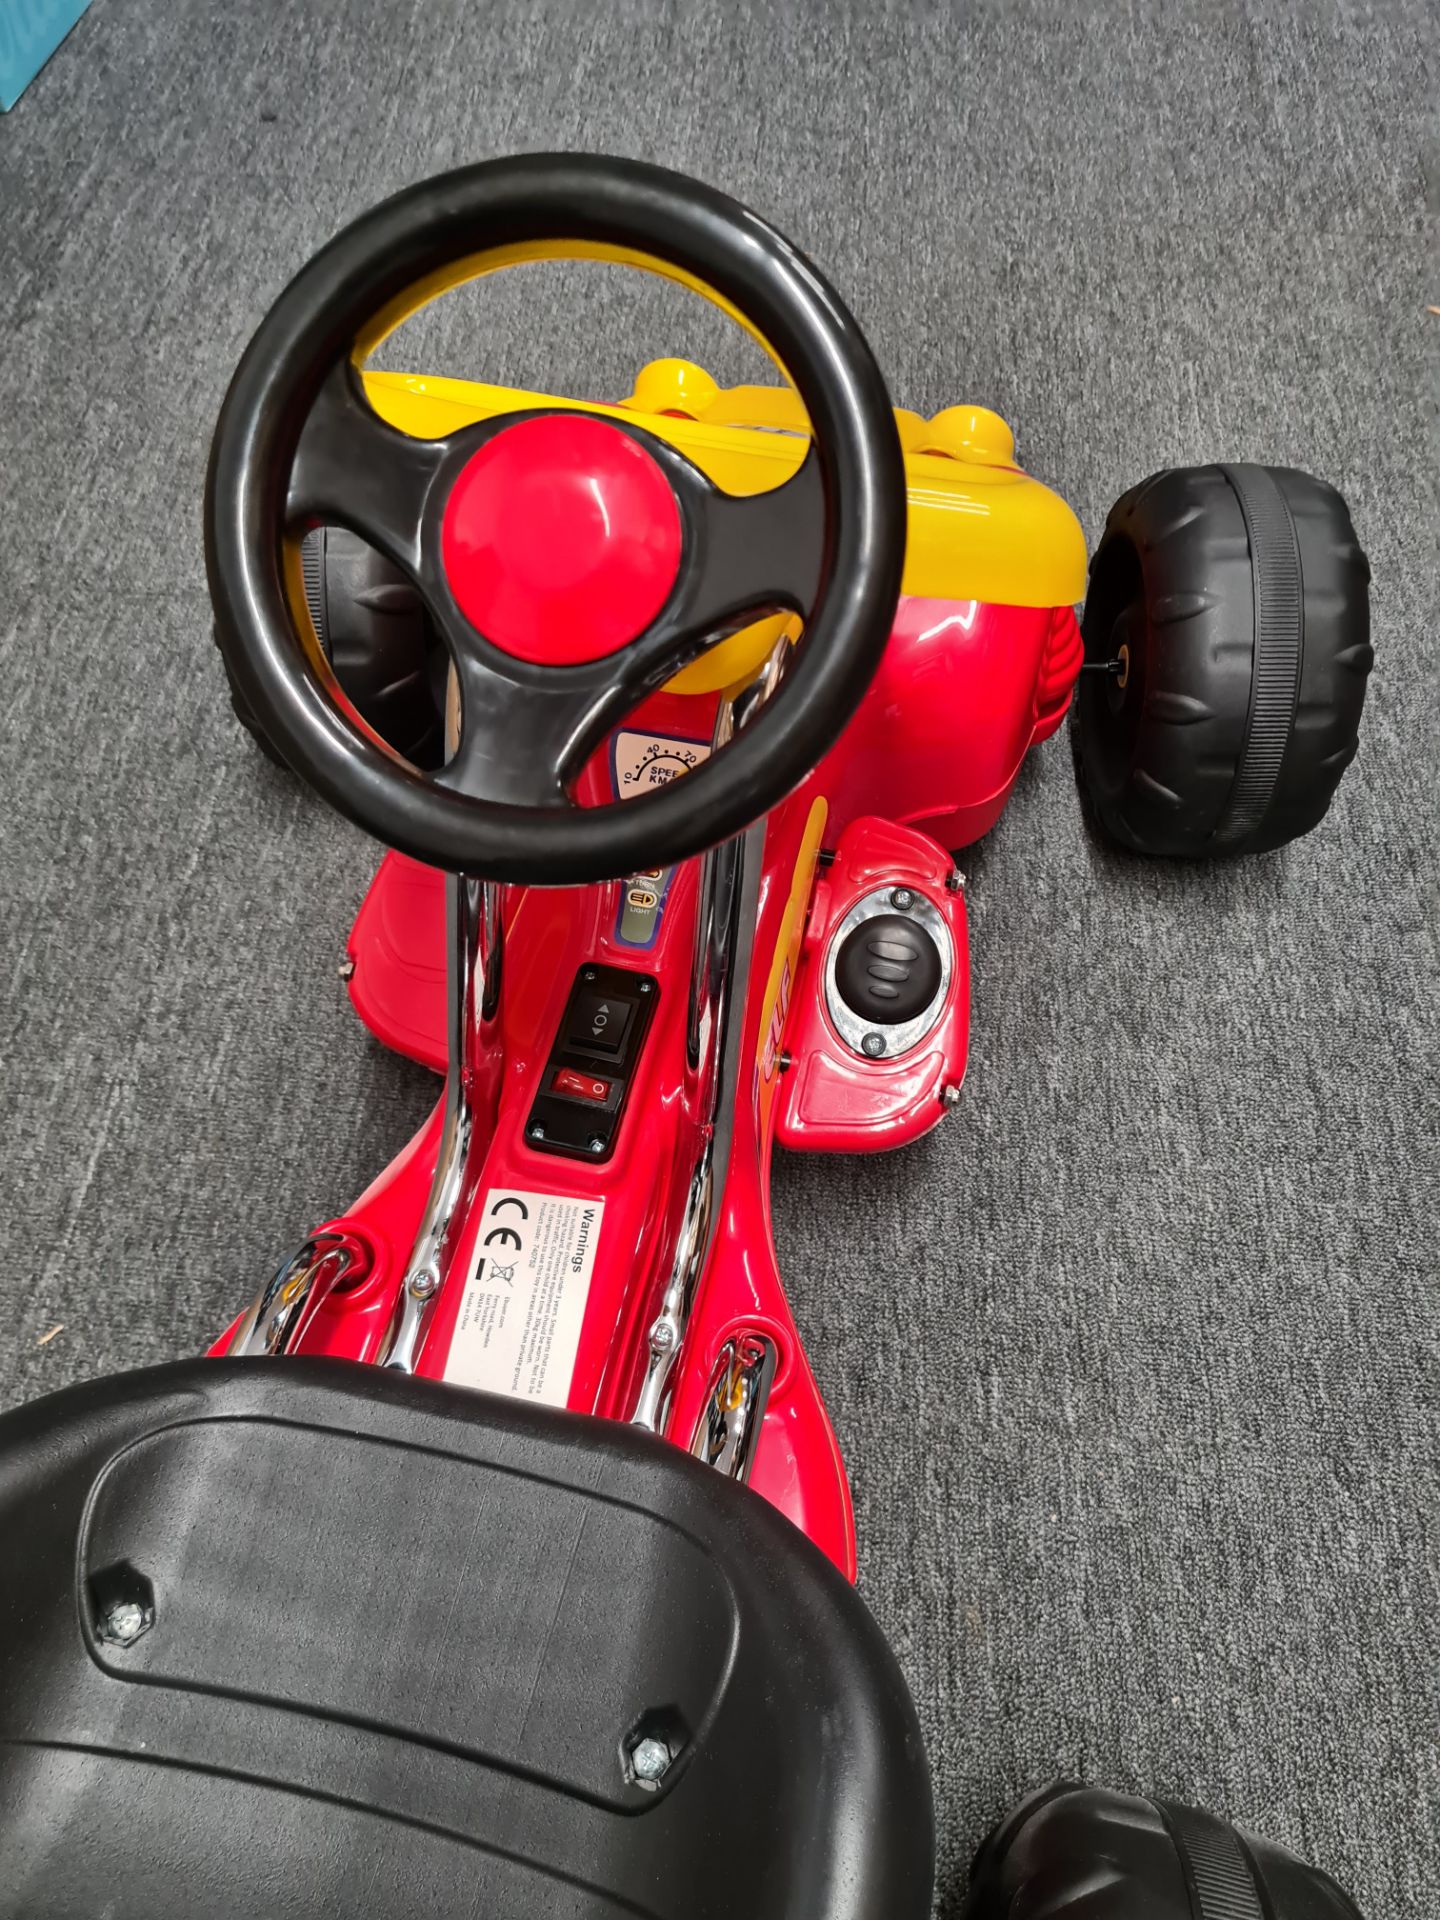 10 X ELECTRIC 6V RIDE ON GO KART - RED / YELLOW £1500 - BRAND NEW FOR KIDS - Bild 3 aus 10